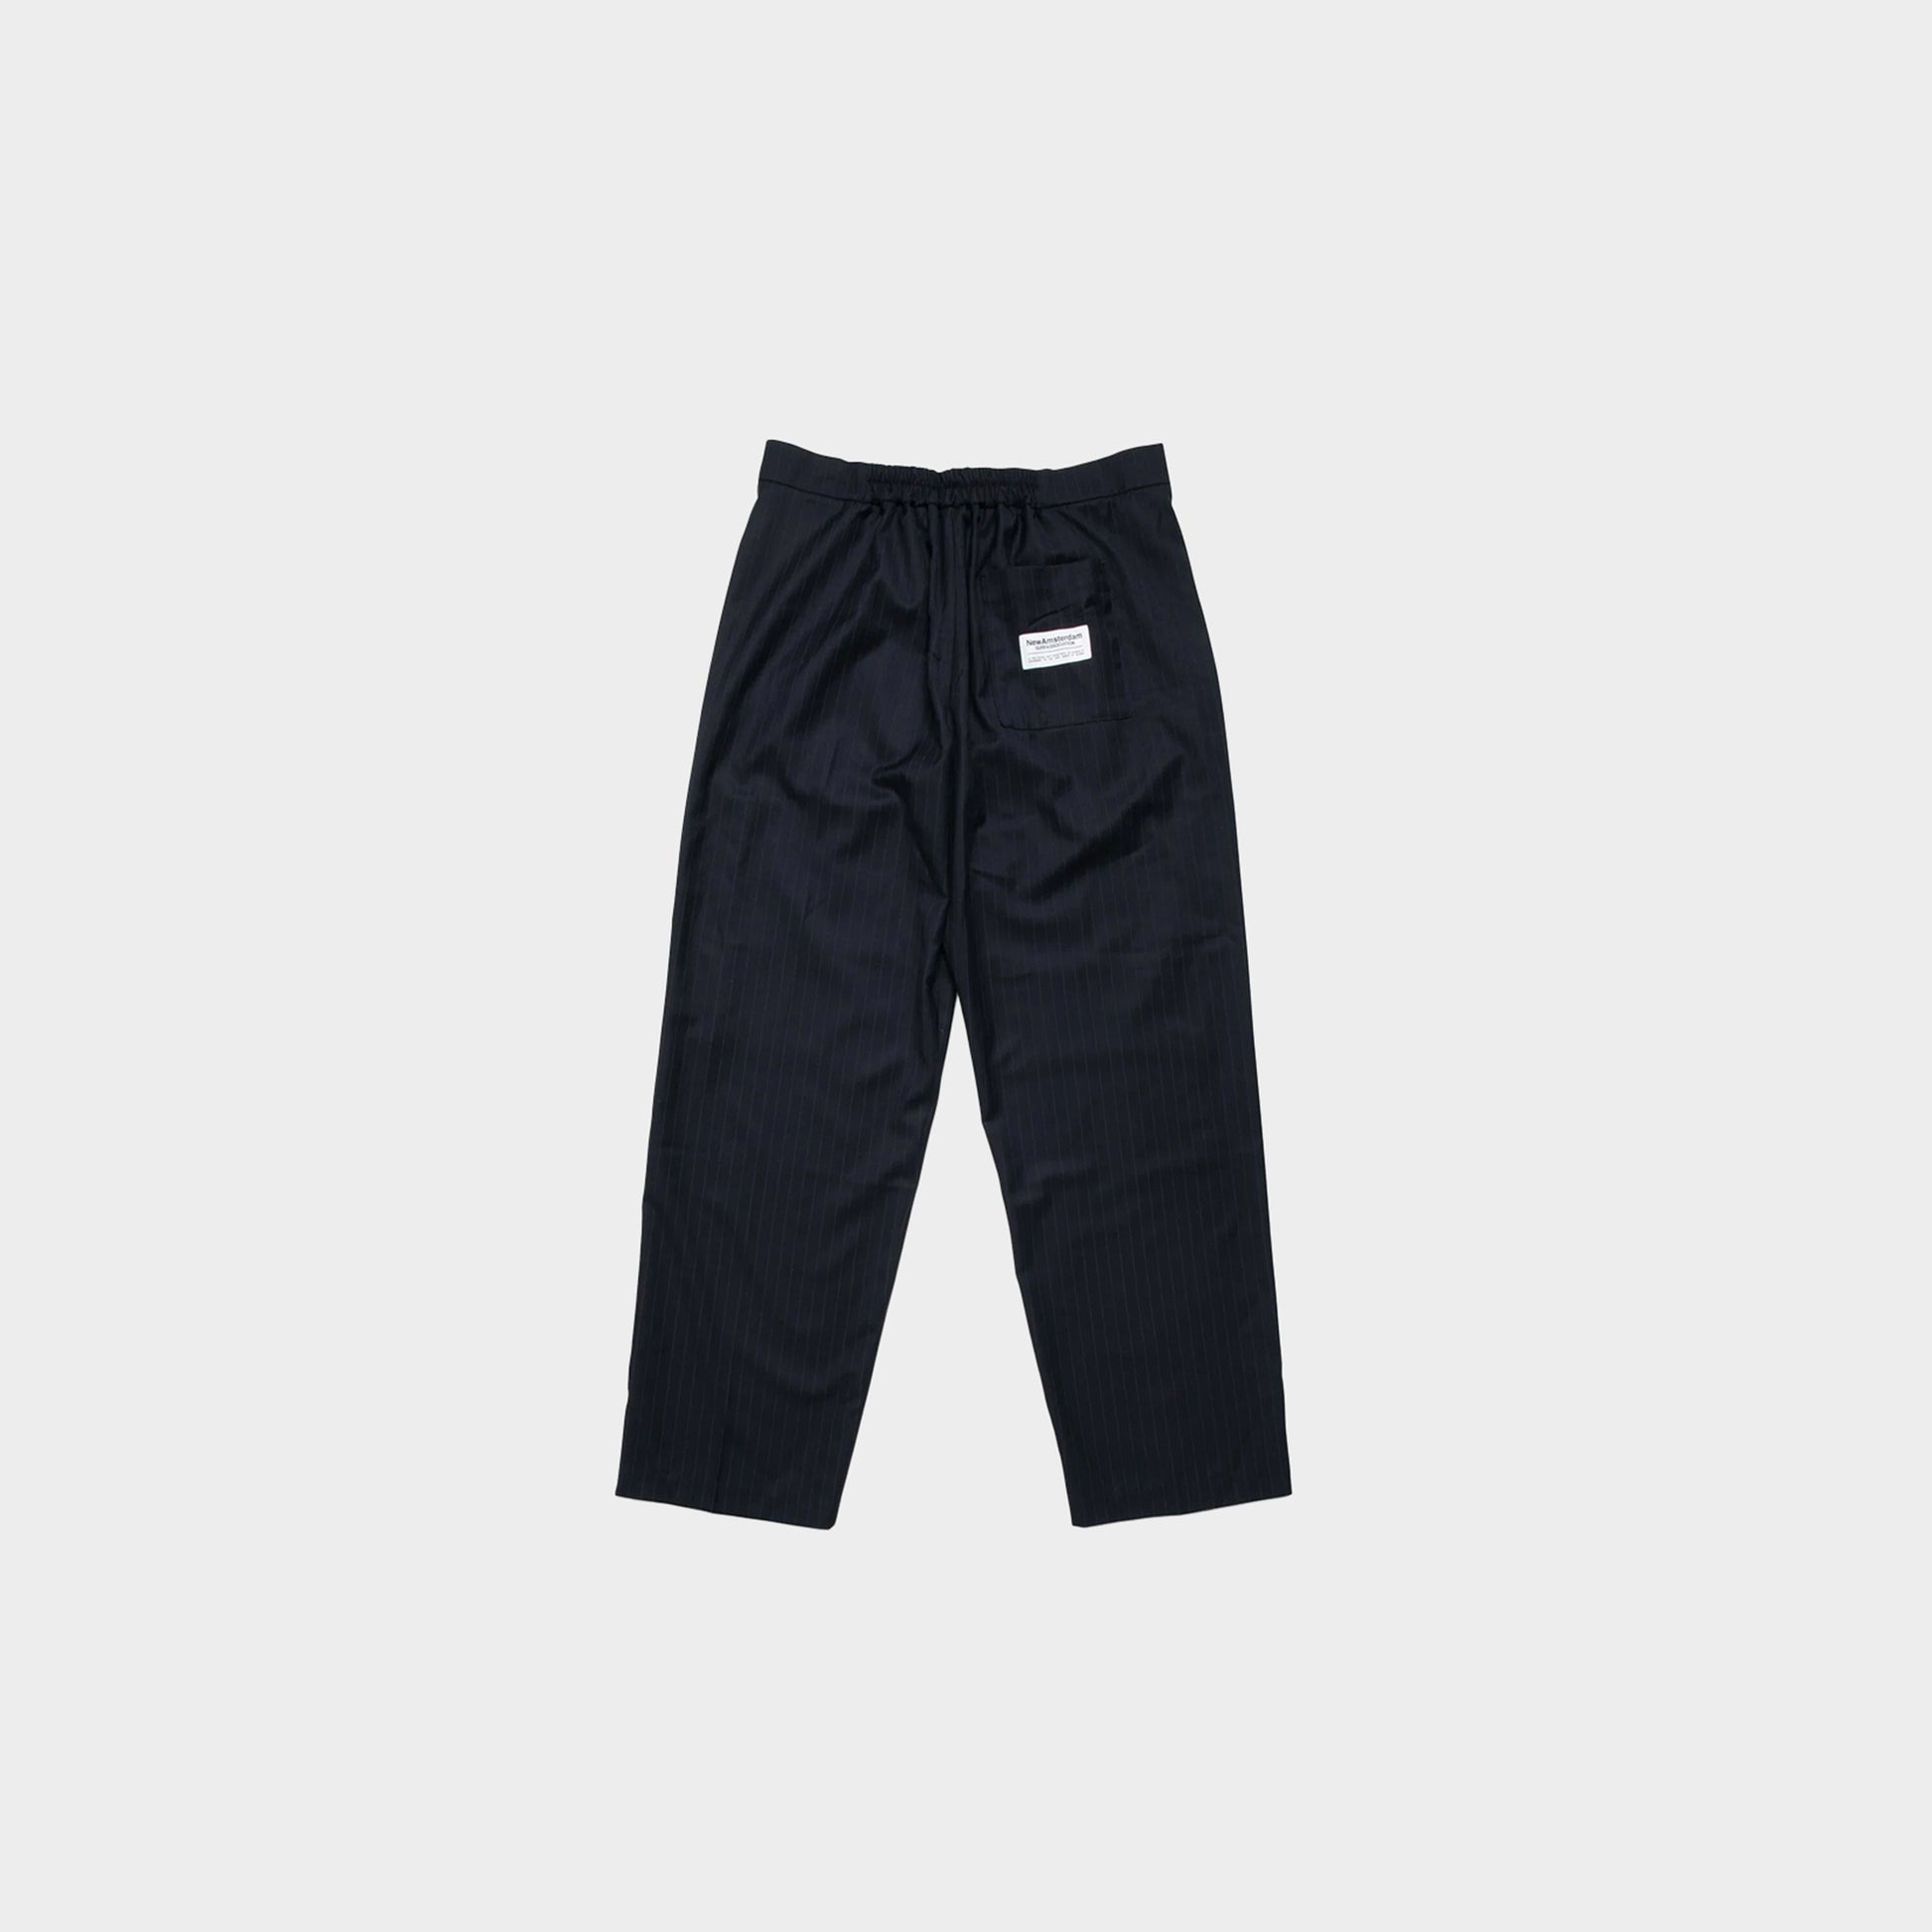 New Amsterdam Surf Association After Trousers in Navy_Purple